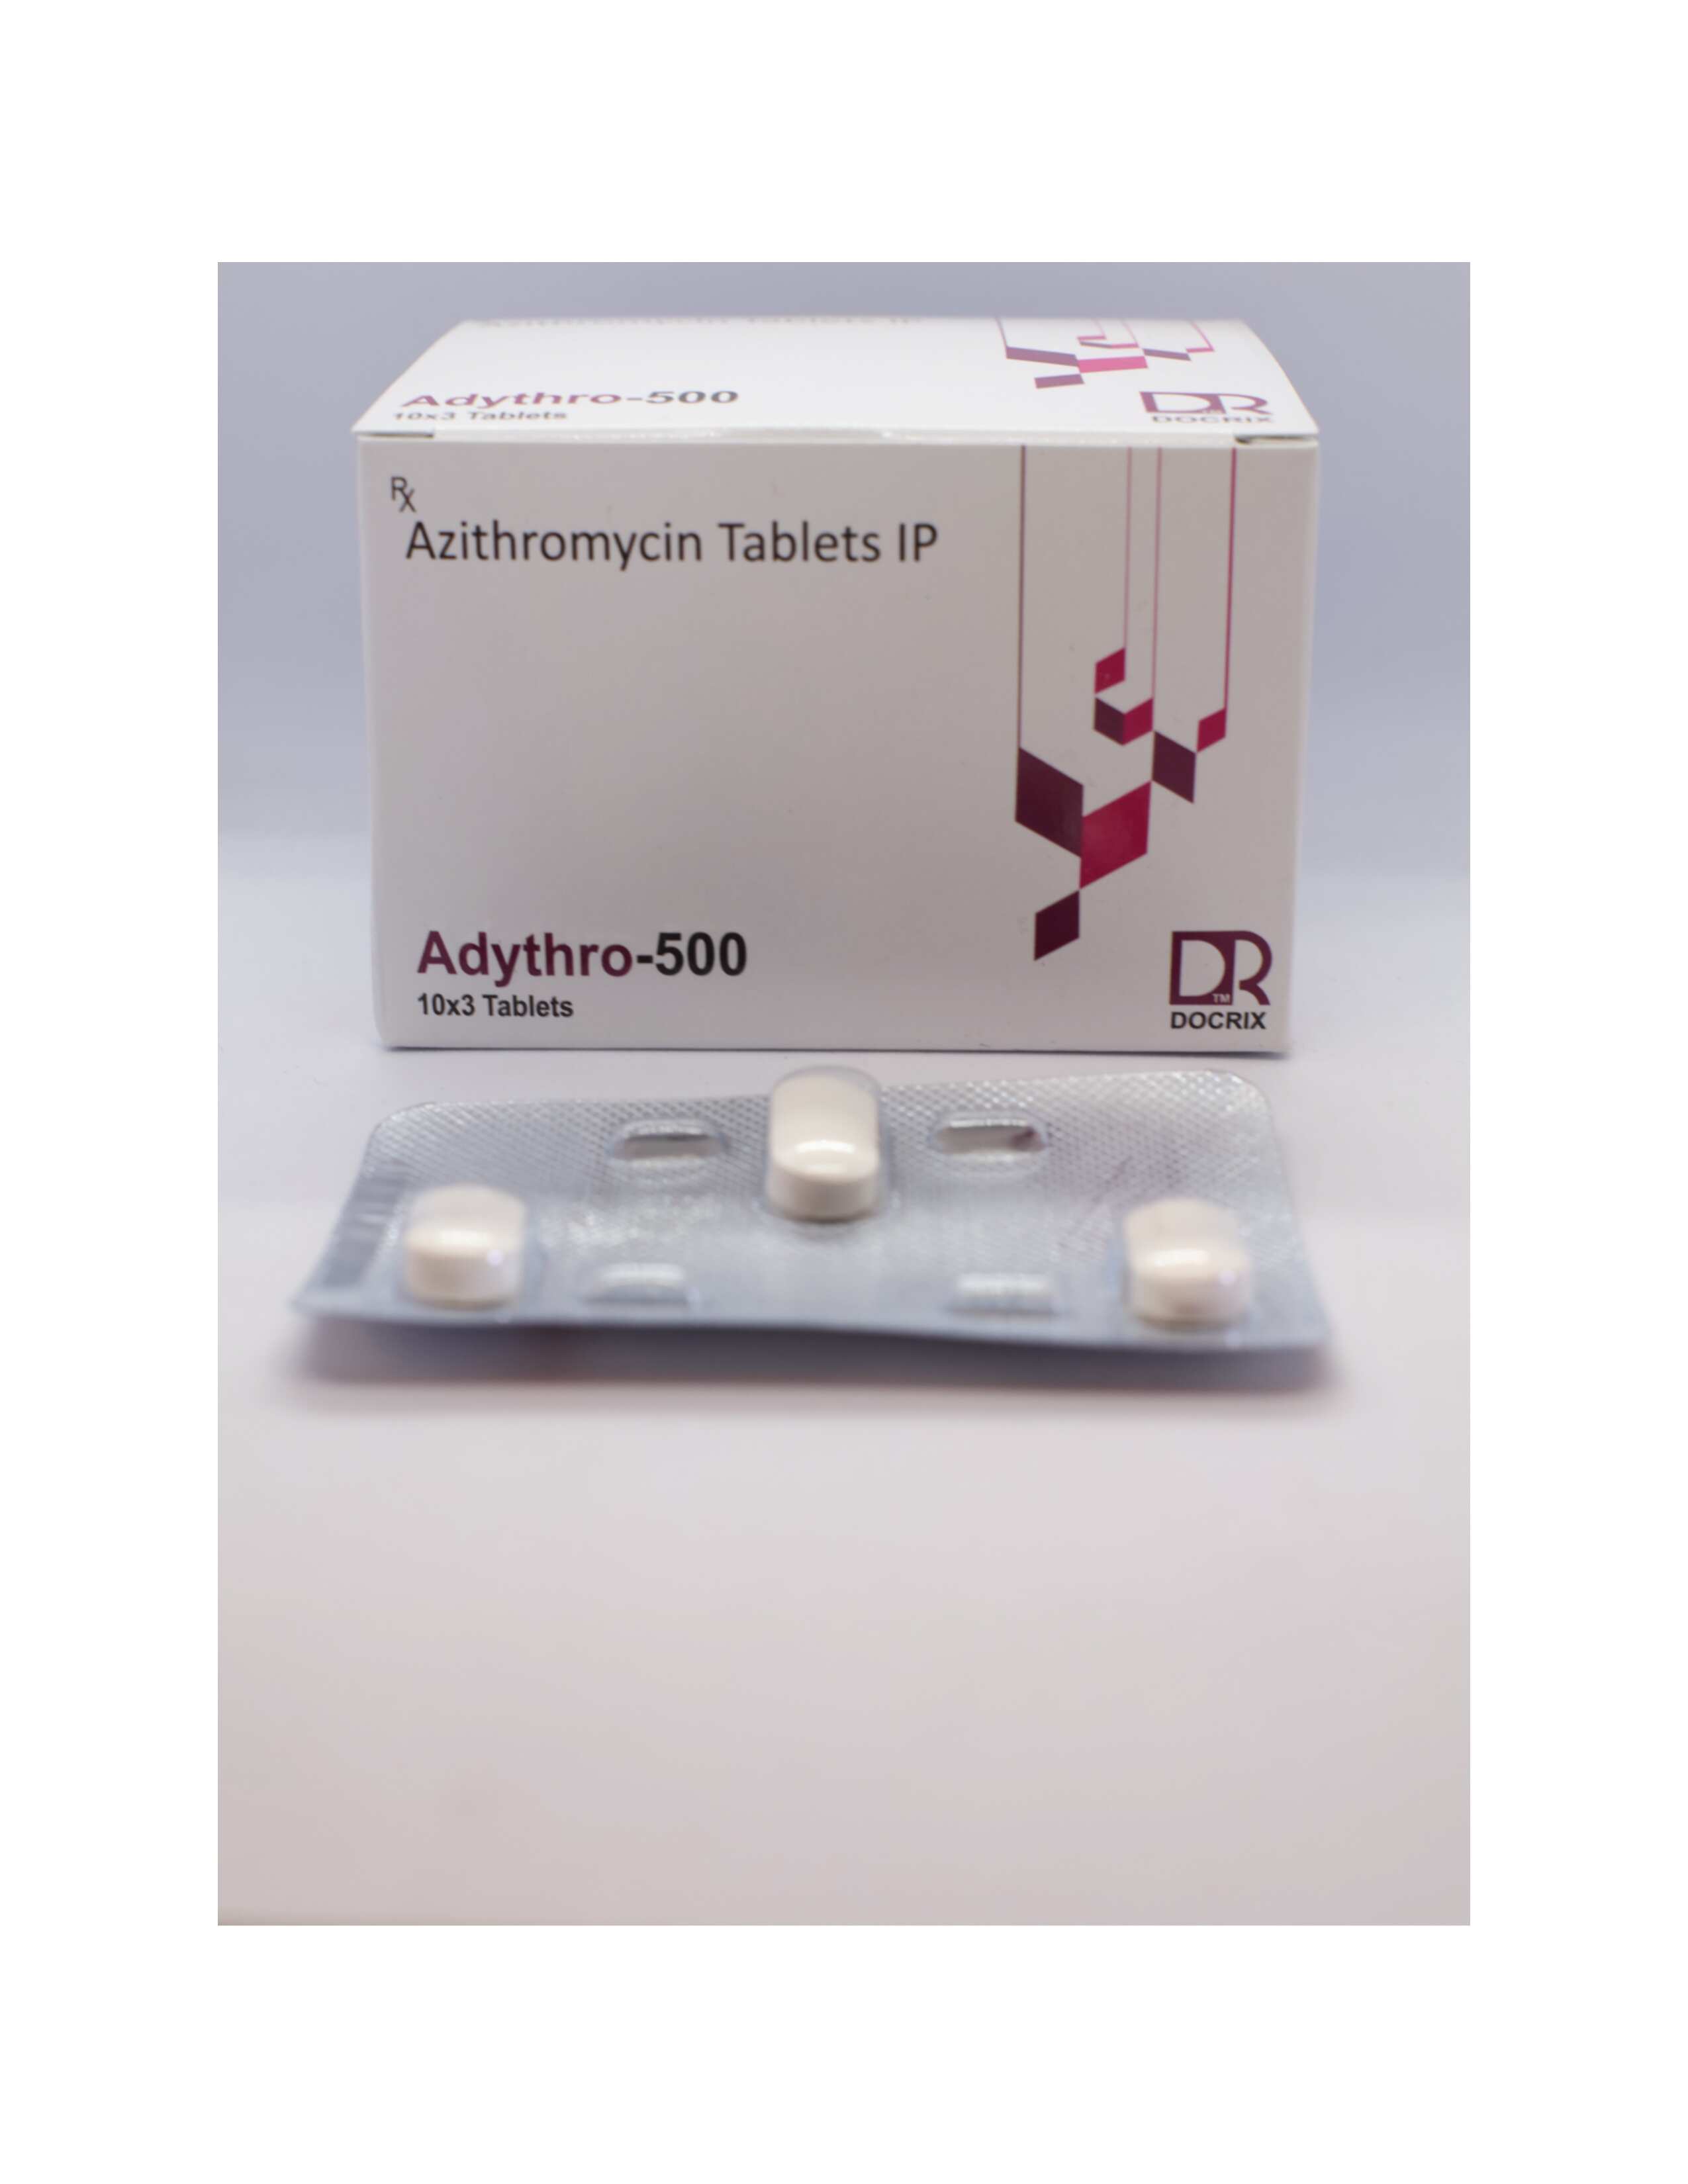 Product Name: Adythro 500, Compositions of Adythro 500 are Azithromycin Tablets IP - Docrix Healthcare